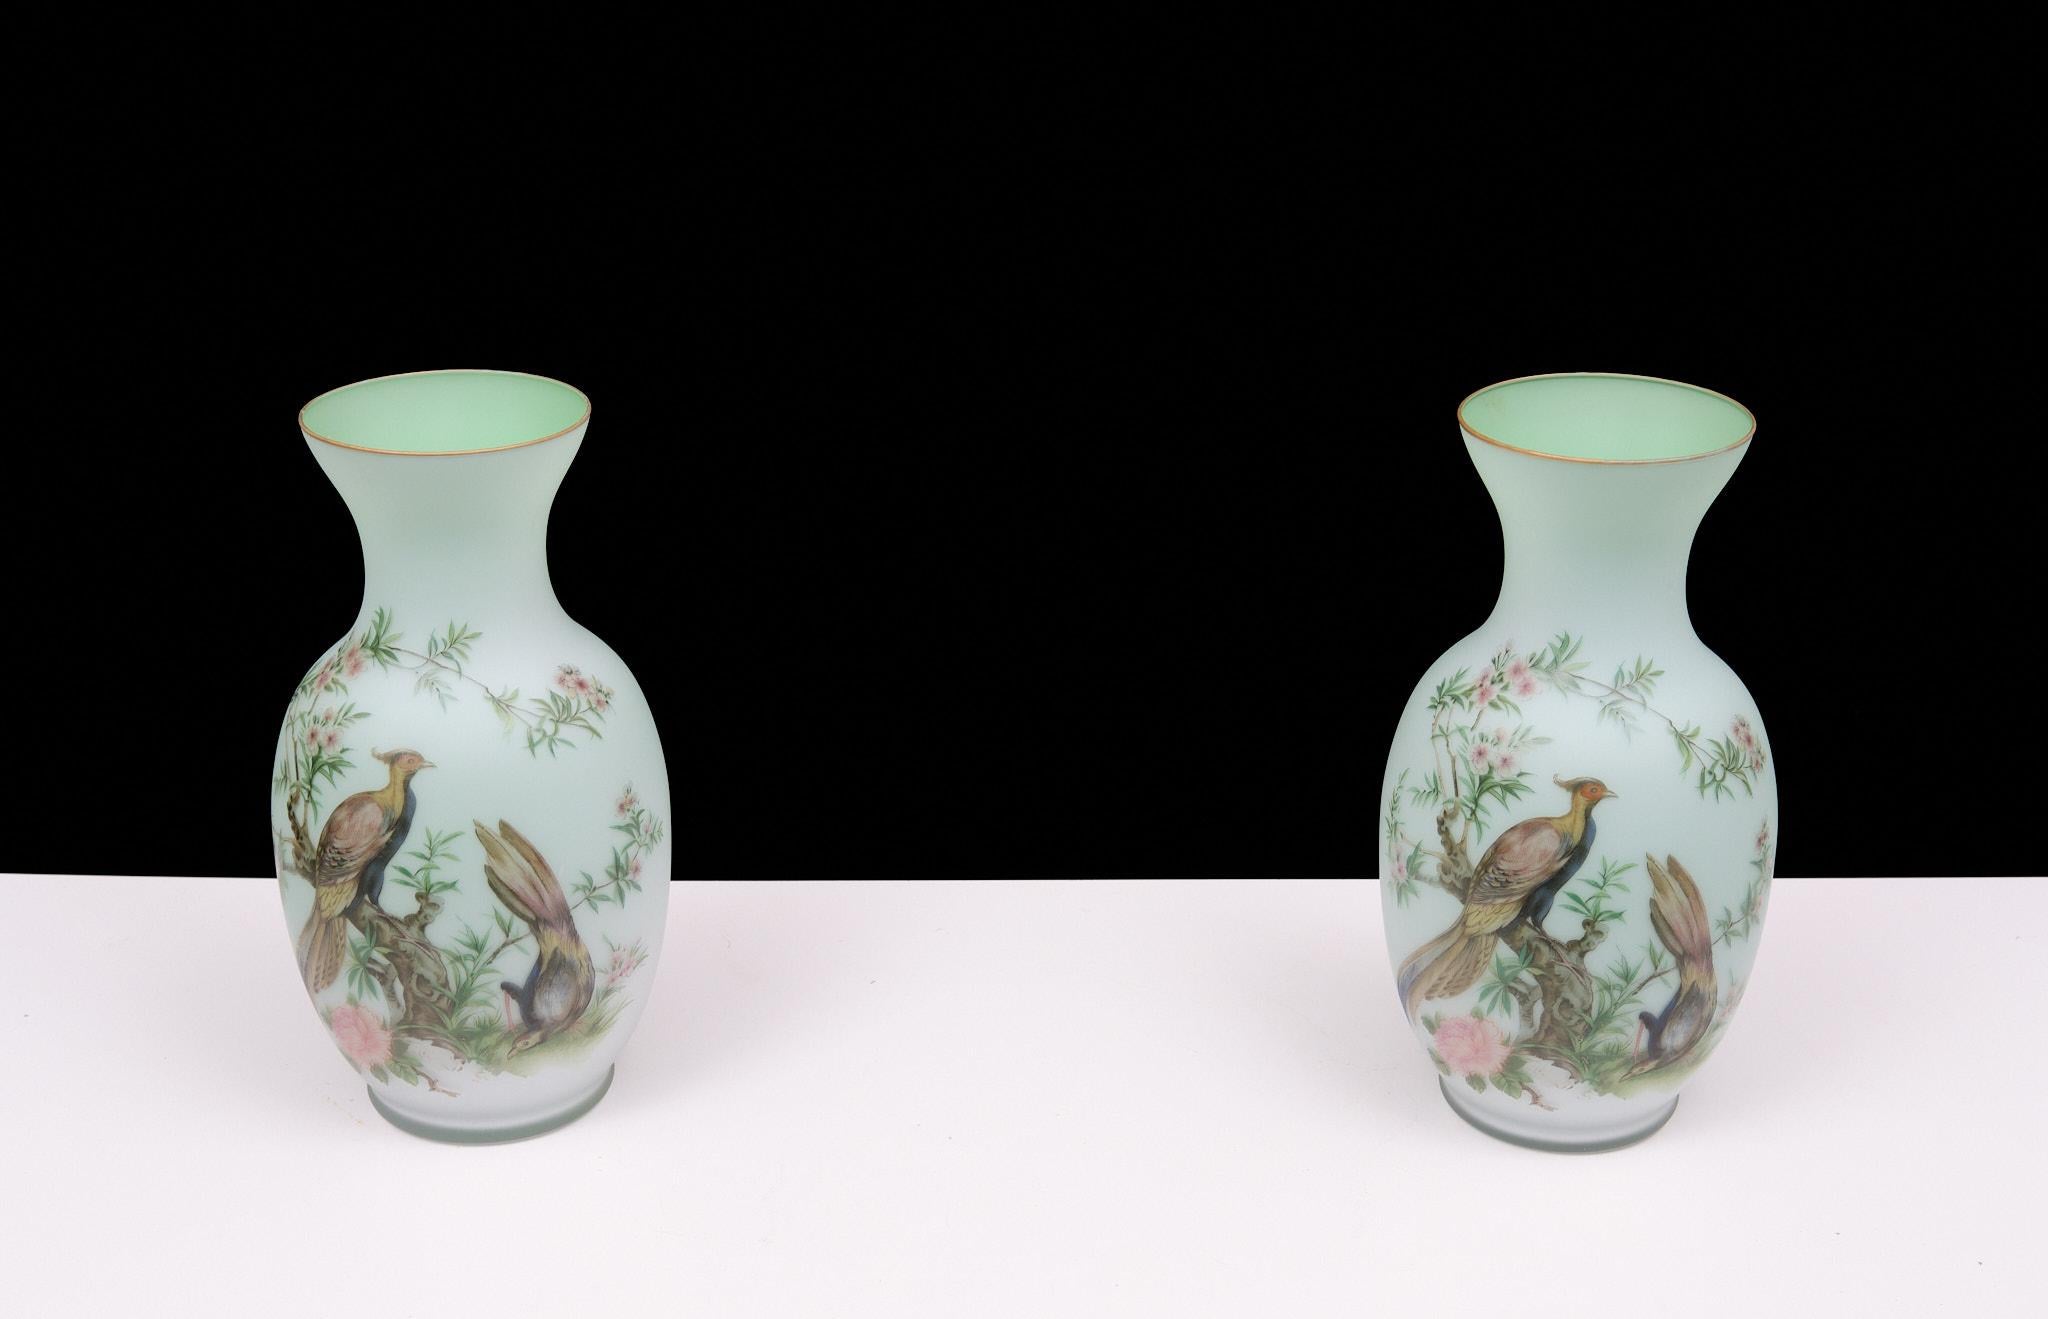 This is a Norleans, made in Italy Opaline hand painted vase. It features three pheasants with tree limbs with flowers. The inside is lime green and there is a gold colored border. It features three pheasants with tree limbs with flowers. The inside